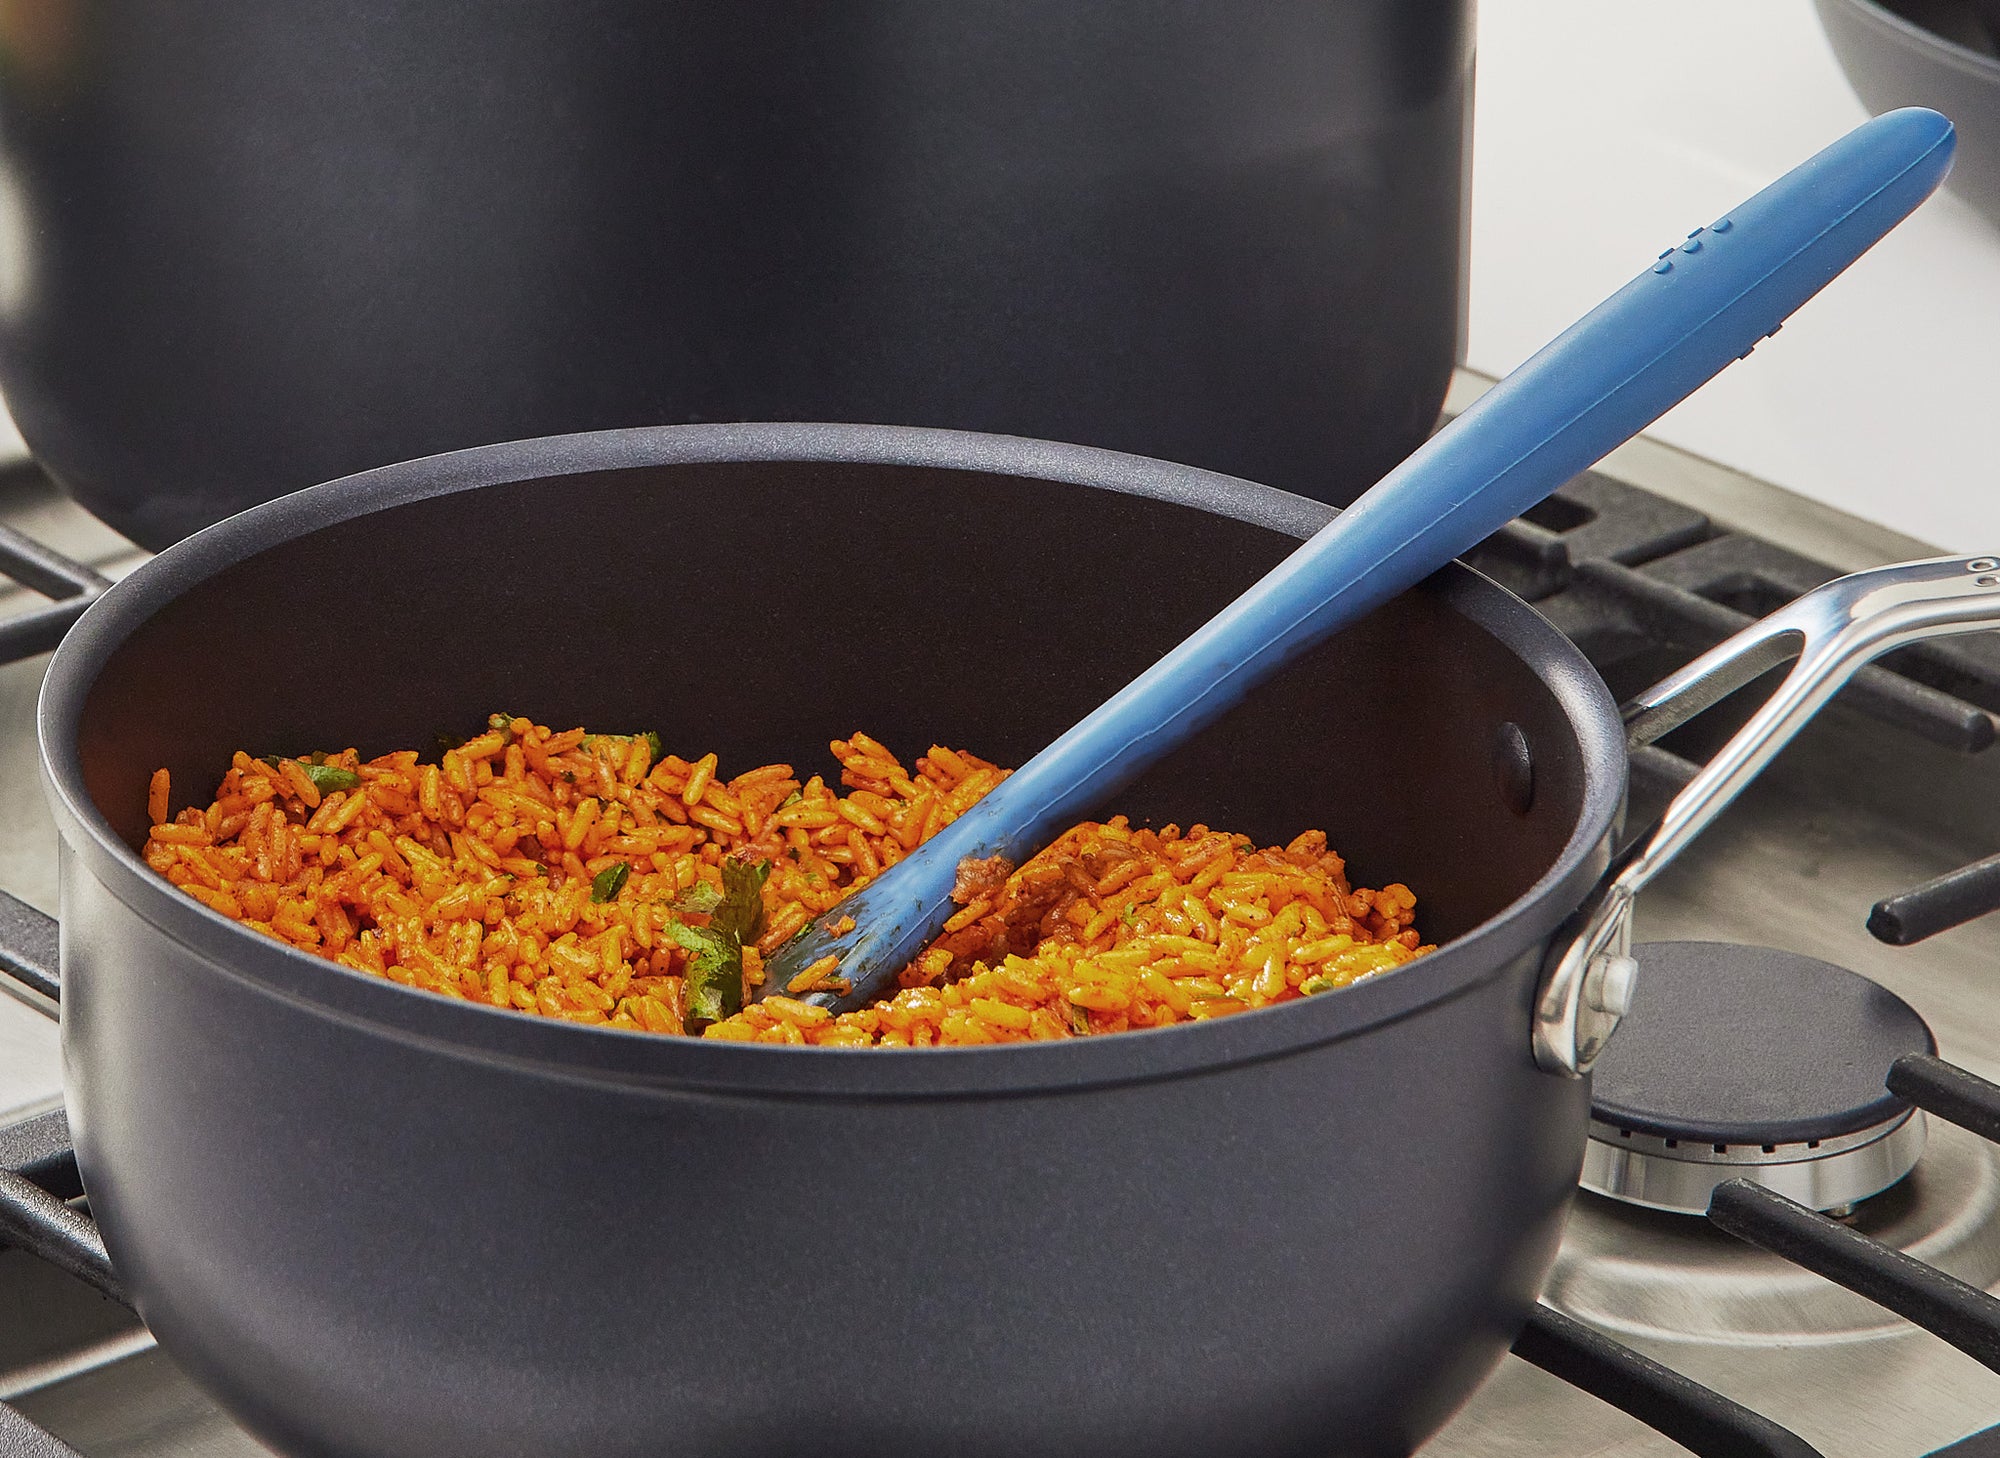 A Misen 3 QT Nonstick Saucier sits on a stovetop, filled with seasoned rice. A blue Misen Silicone spatula rests inside the Saucier.